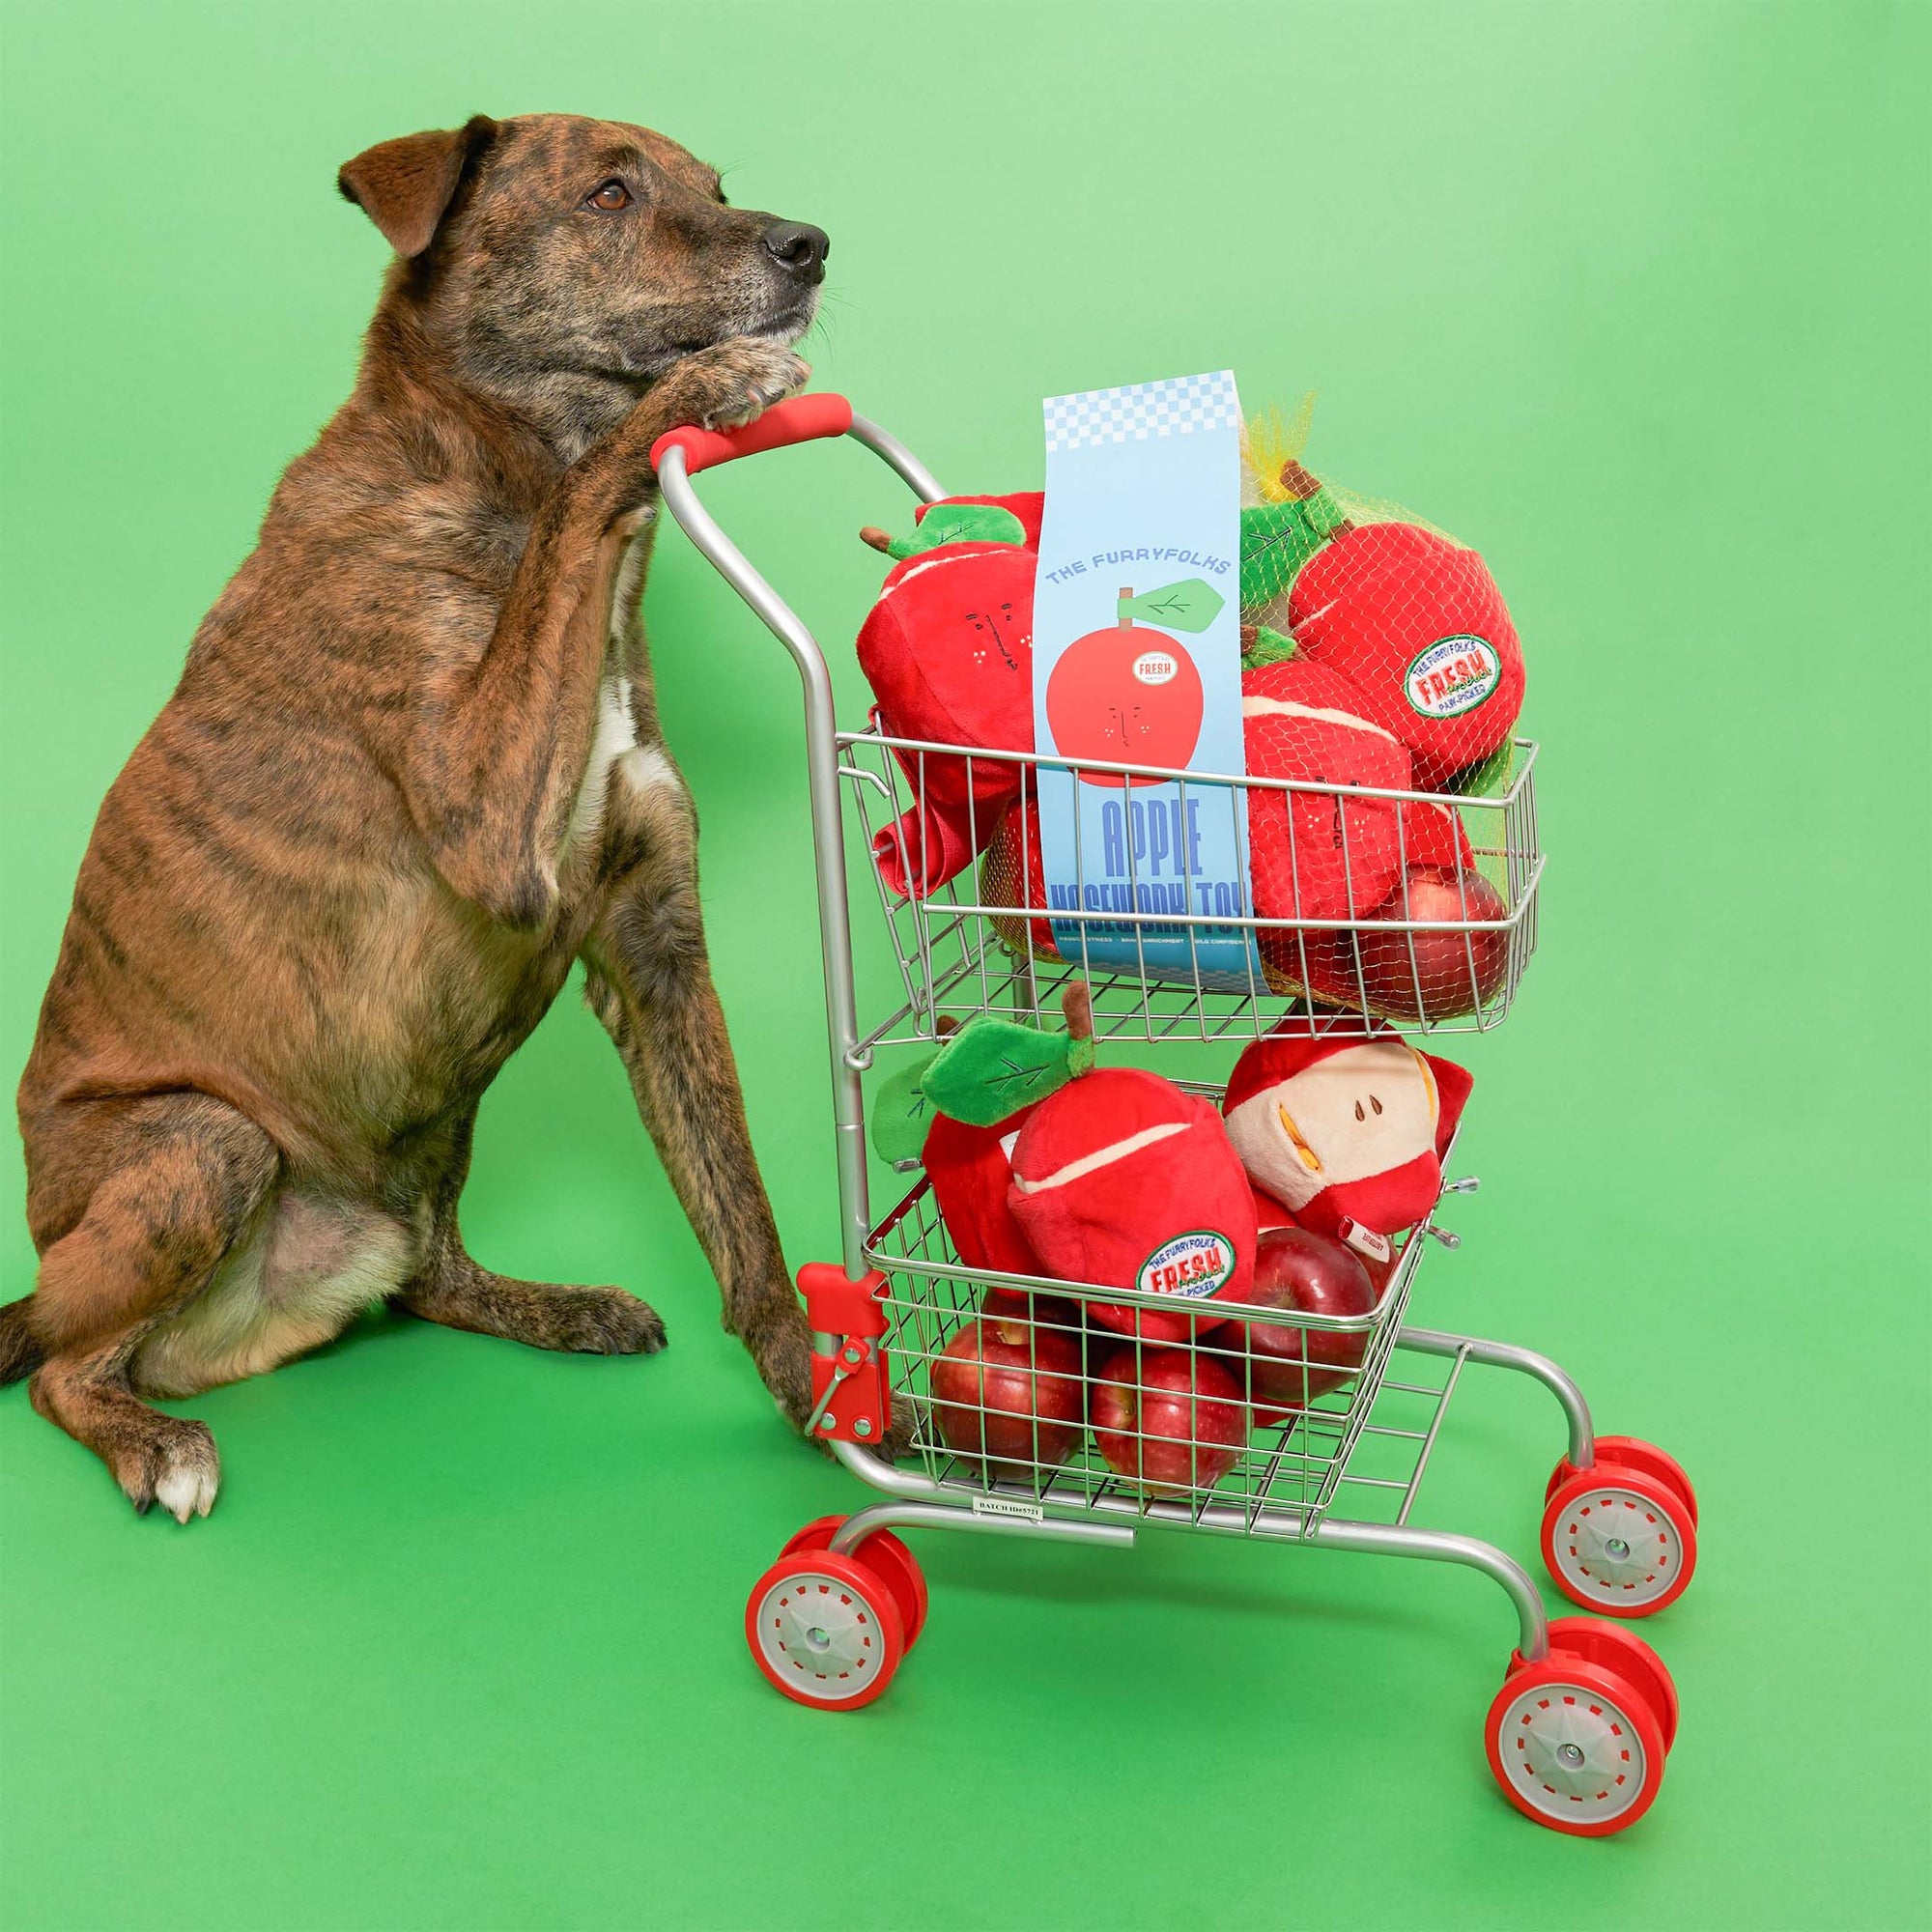 A brown dog standing beside a shopping cart filled with red apple-shaped dog toys and a label saying "The Furryfolks Apple Nosework Toy" on a green background.